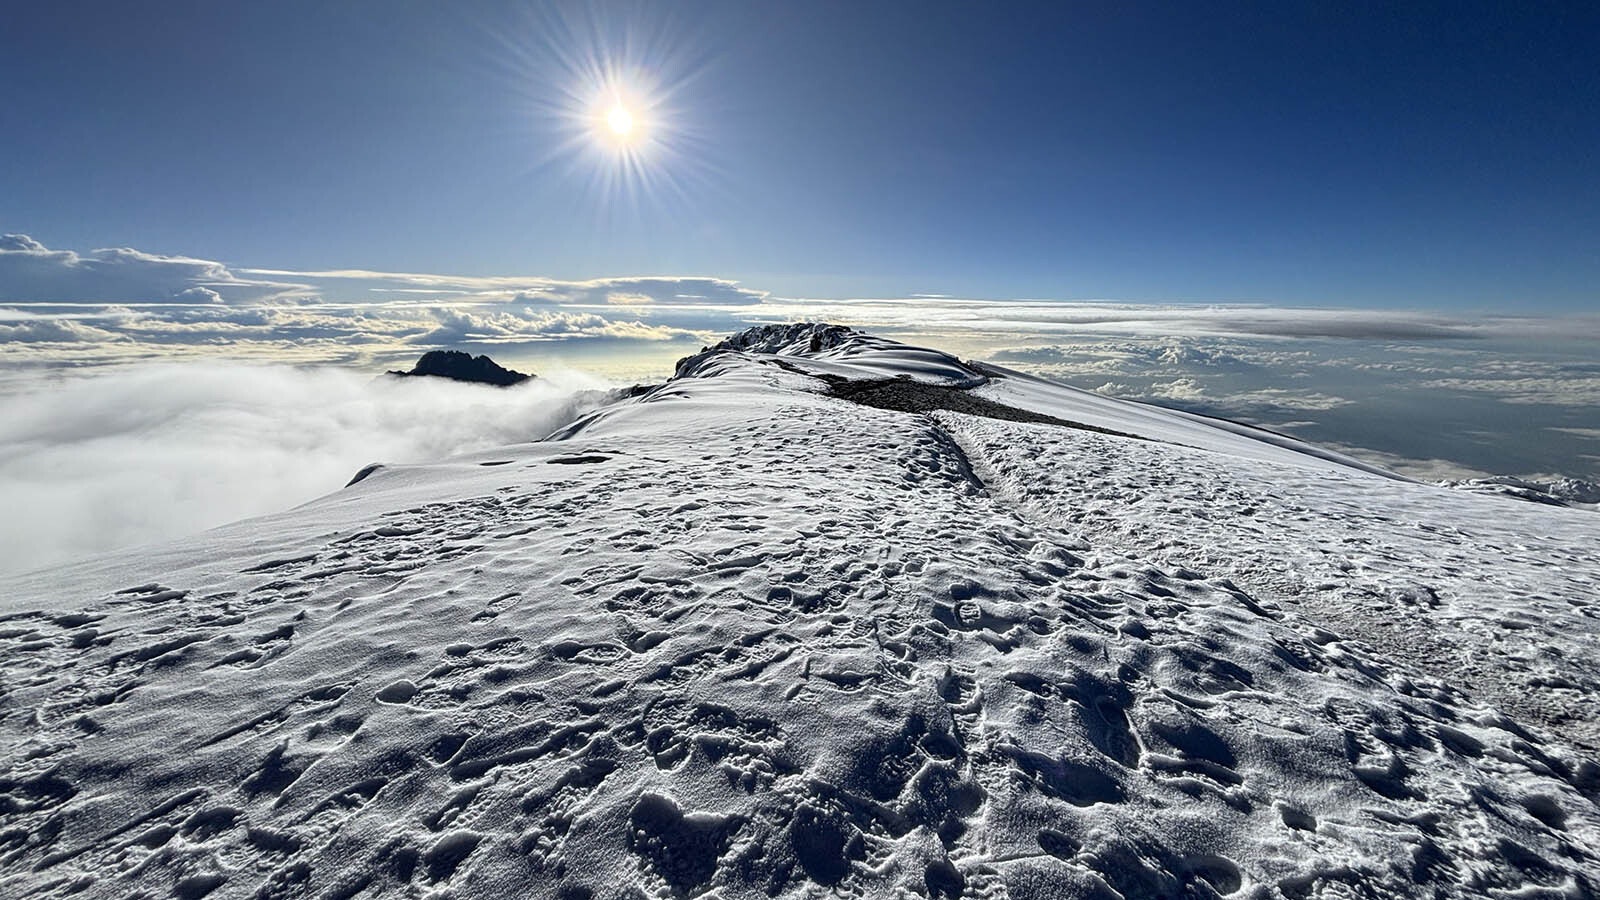 View from the top of Mount Kilimanjaro.